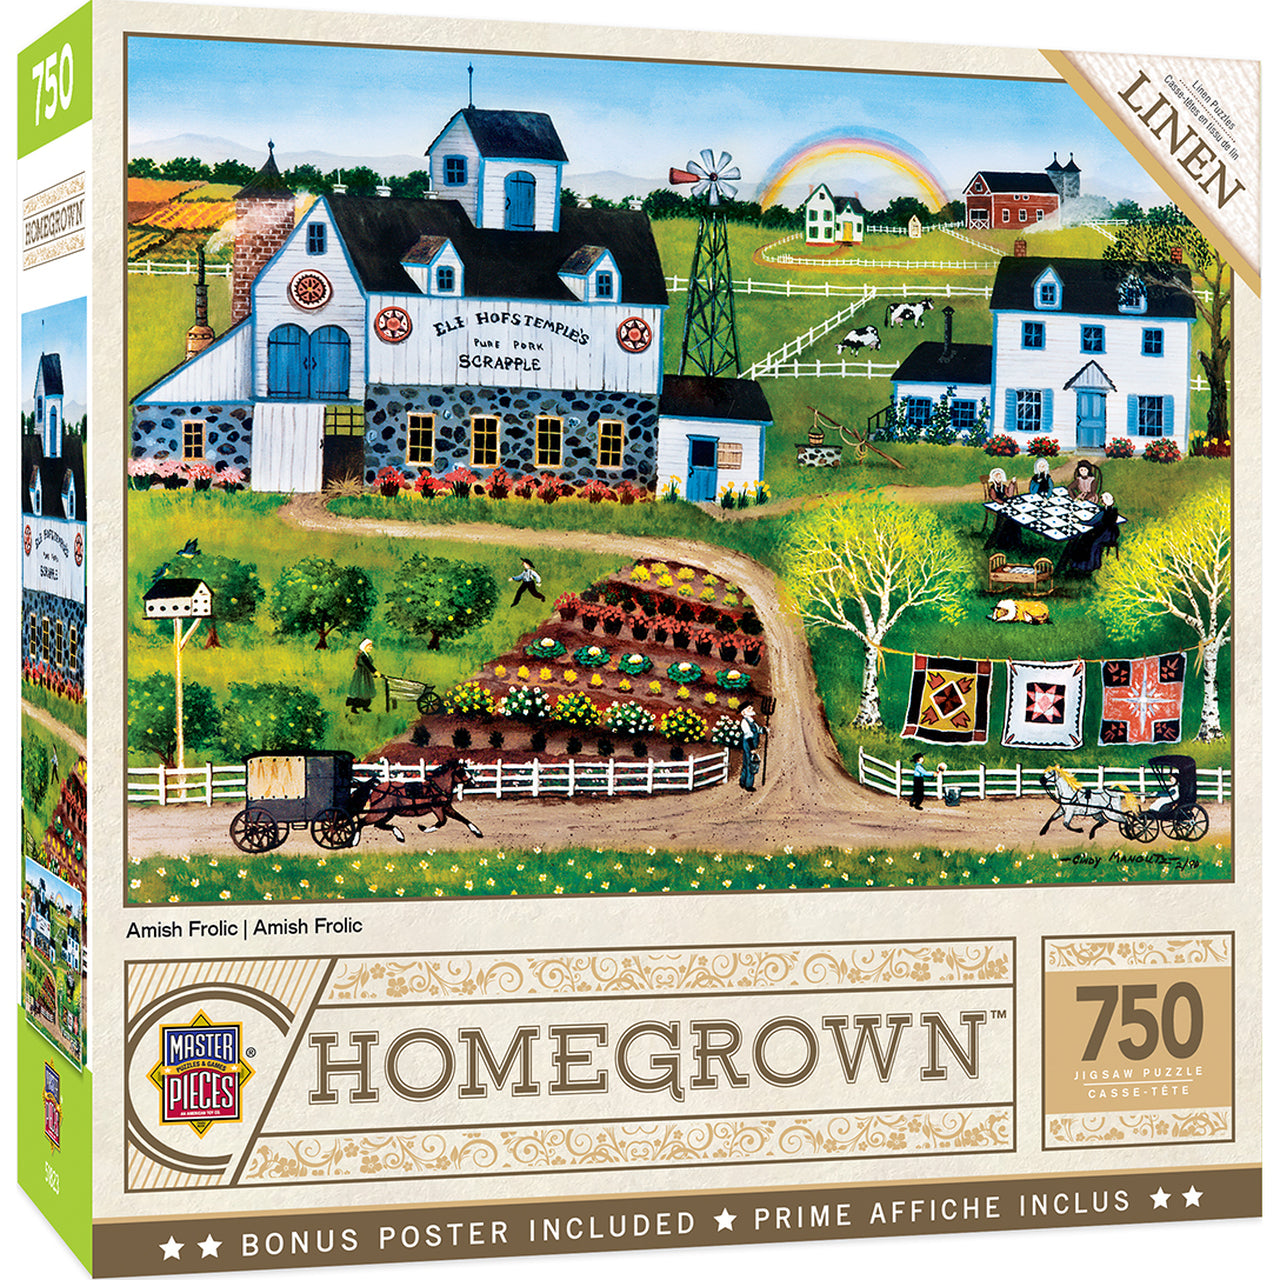 Homegrown - Amish Frolic 750 Piece Jigsaw Puzzle by Masterpieces